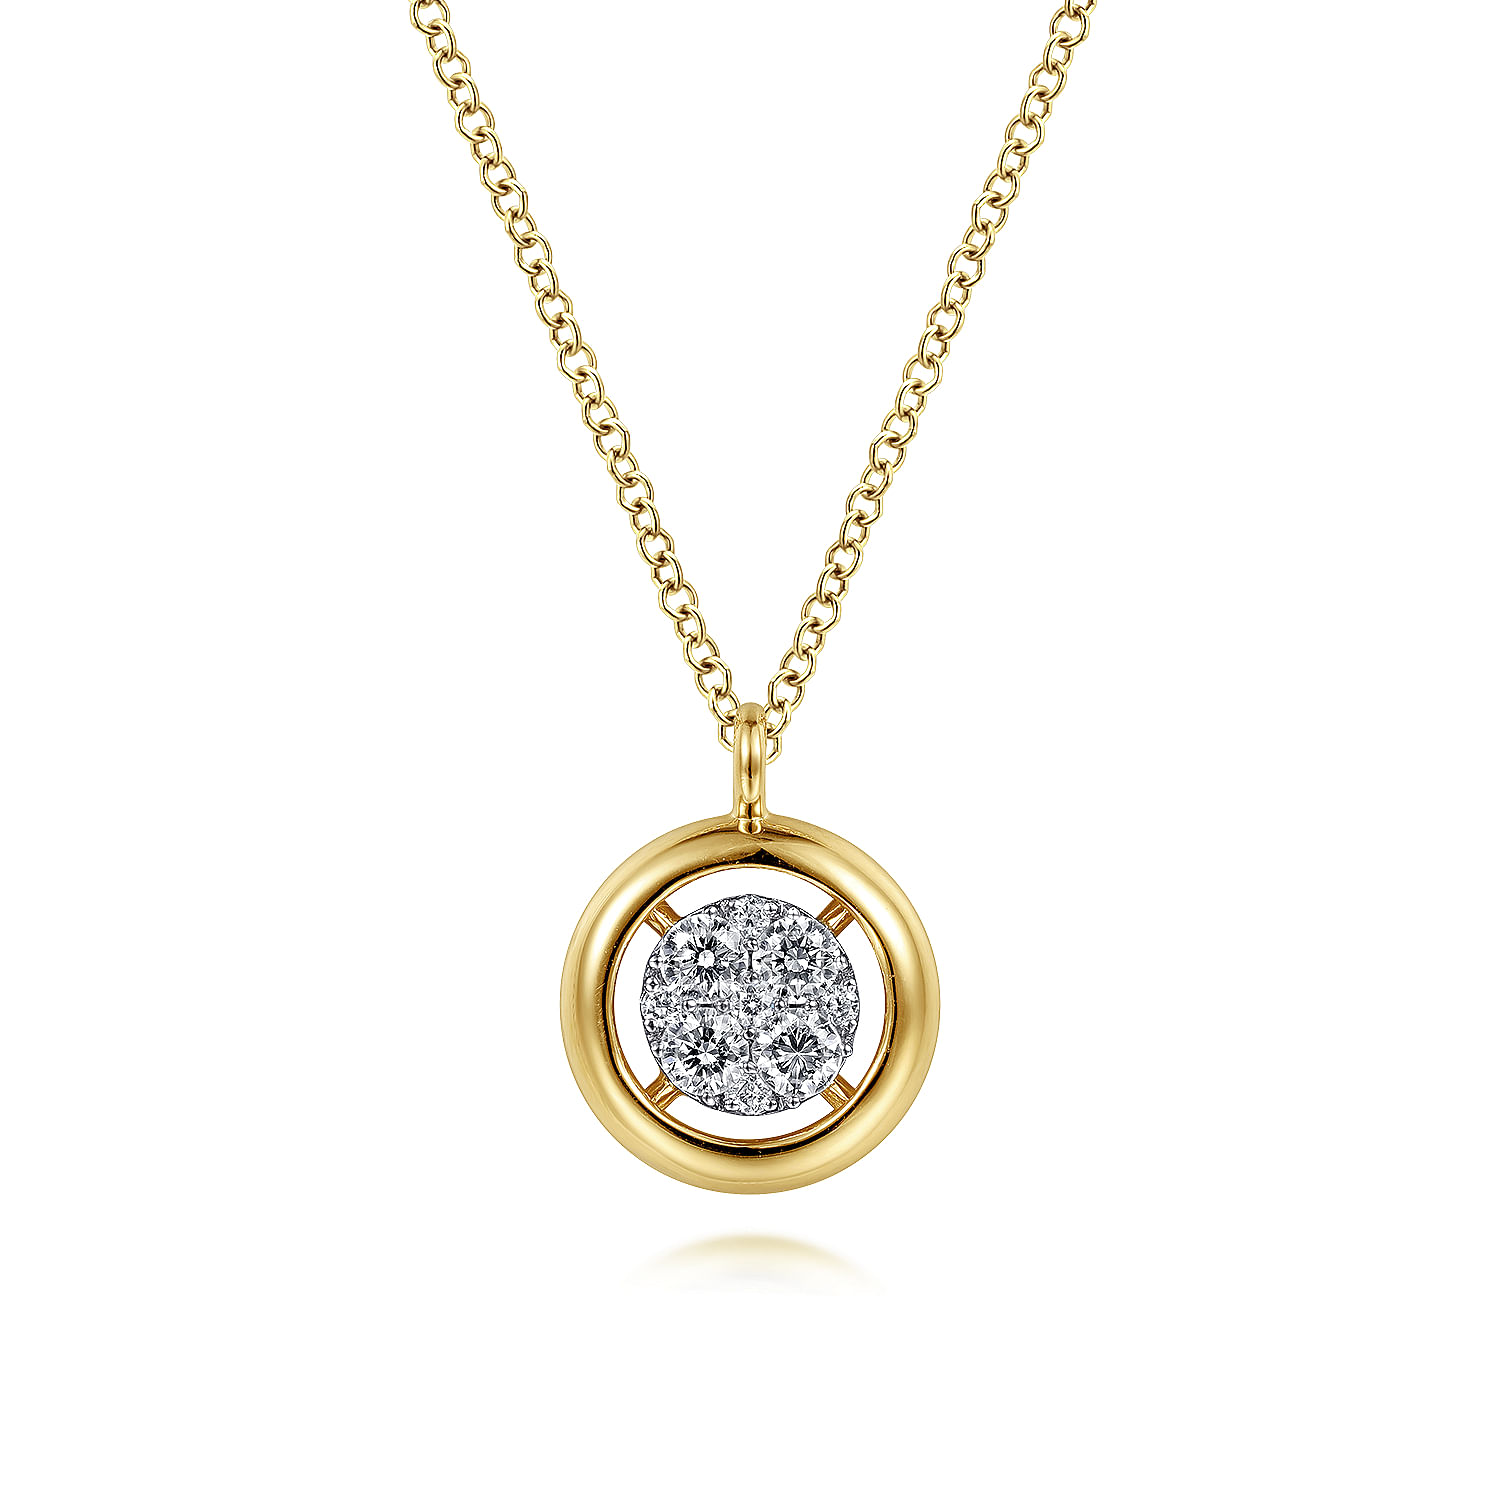 Gabriel - 14K Yellow Gold Round Pavé Diamond Floating Pendant Necklace with Wide Border